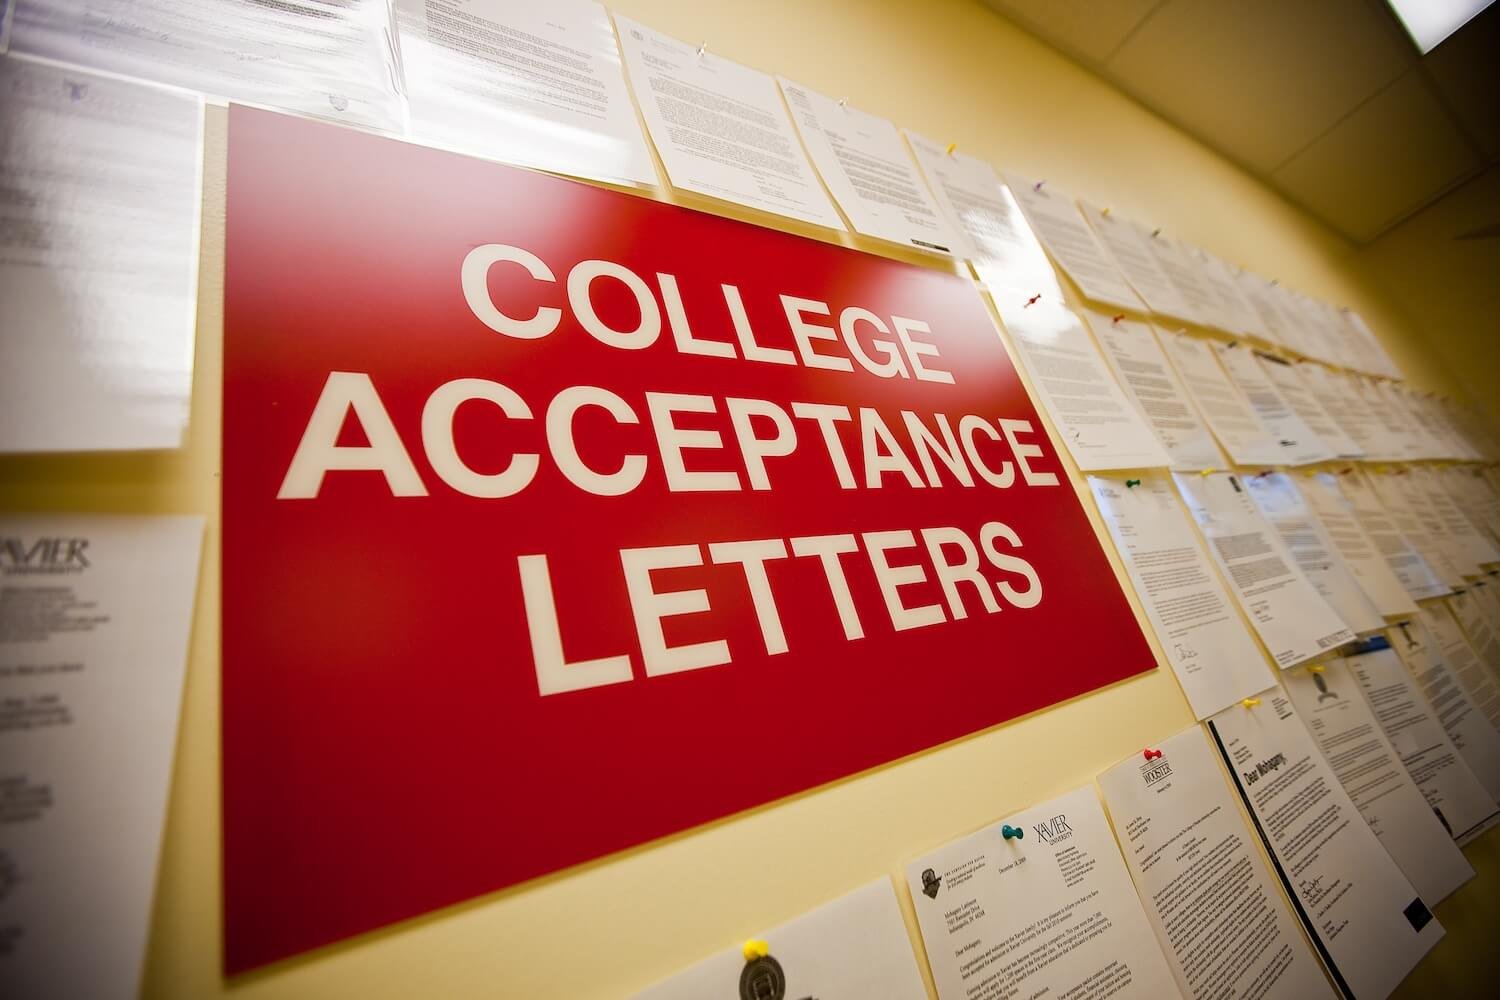 College Acceptance - Score At The Top